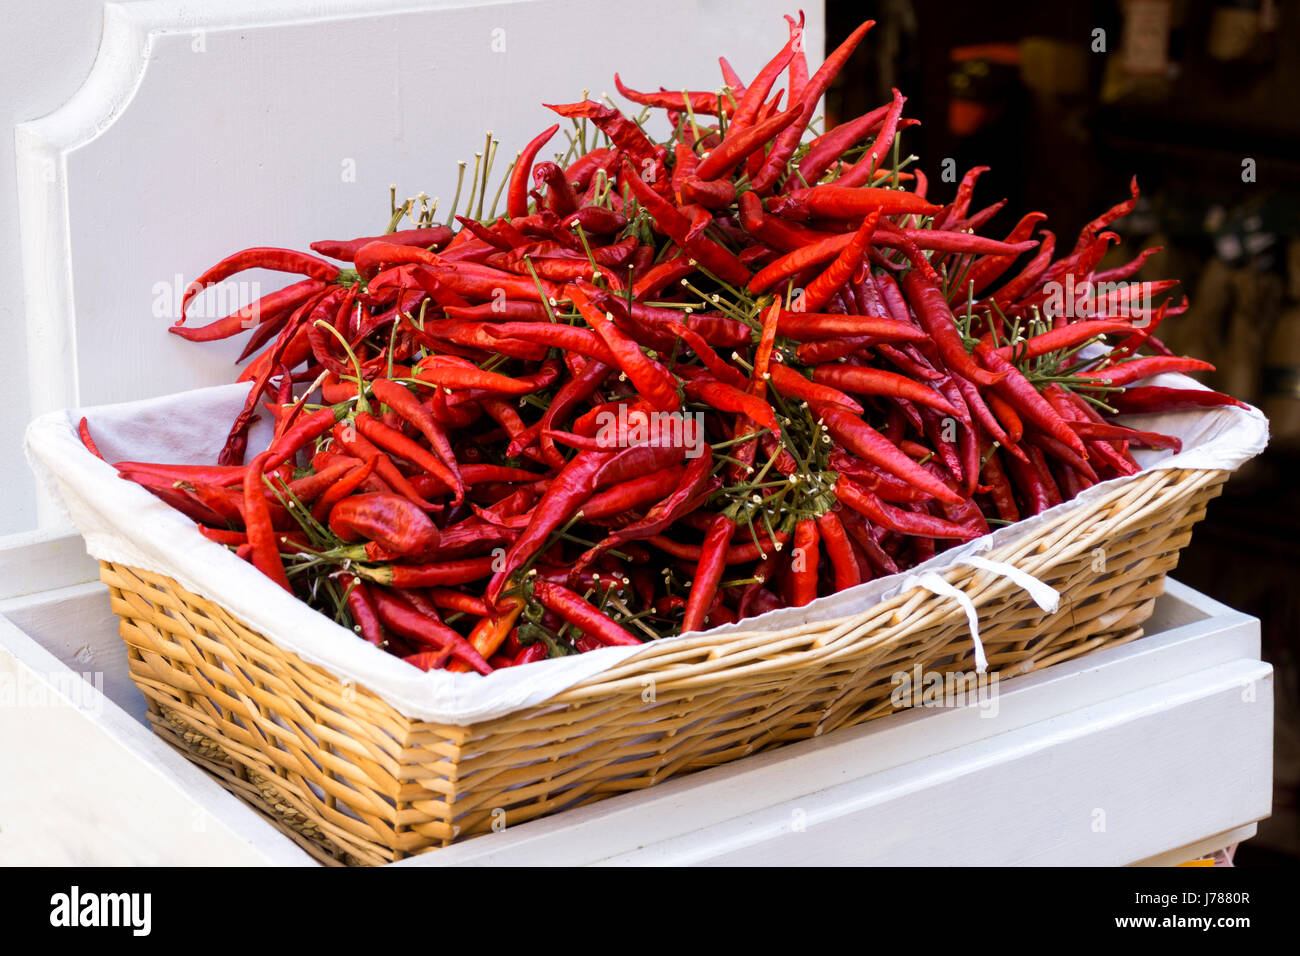 Red dry chili peppers in a straw basket Stock Photo